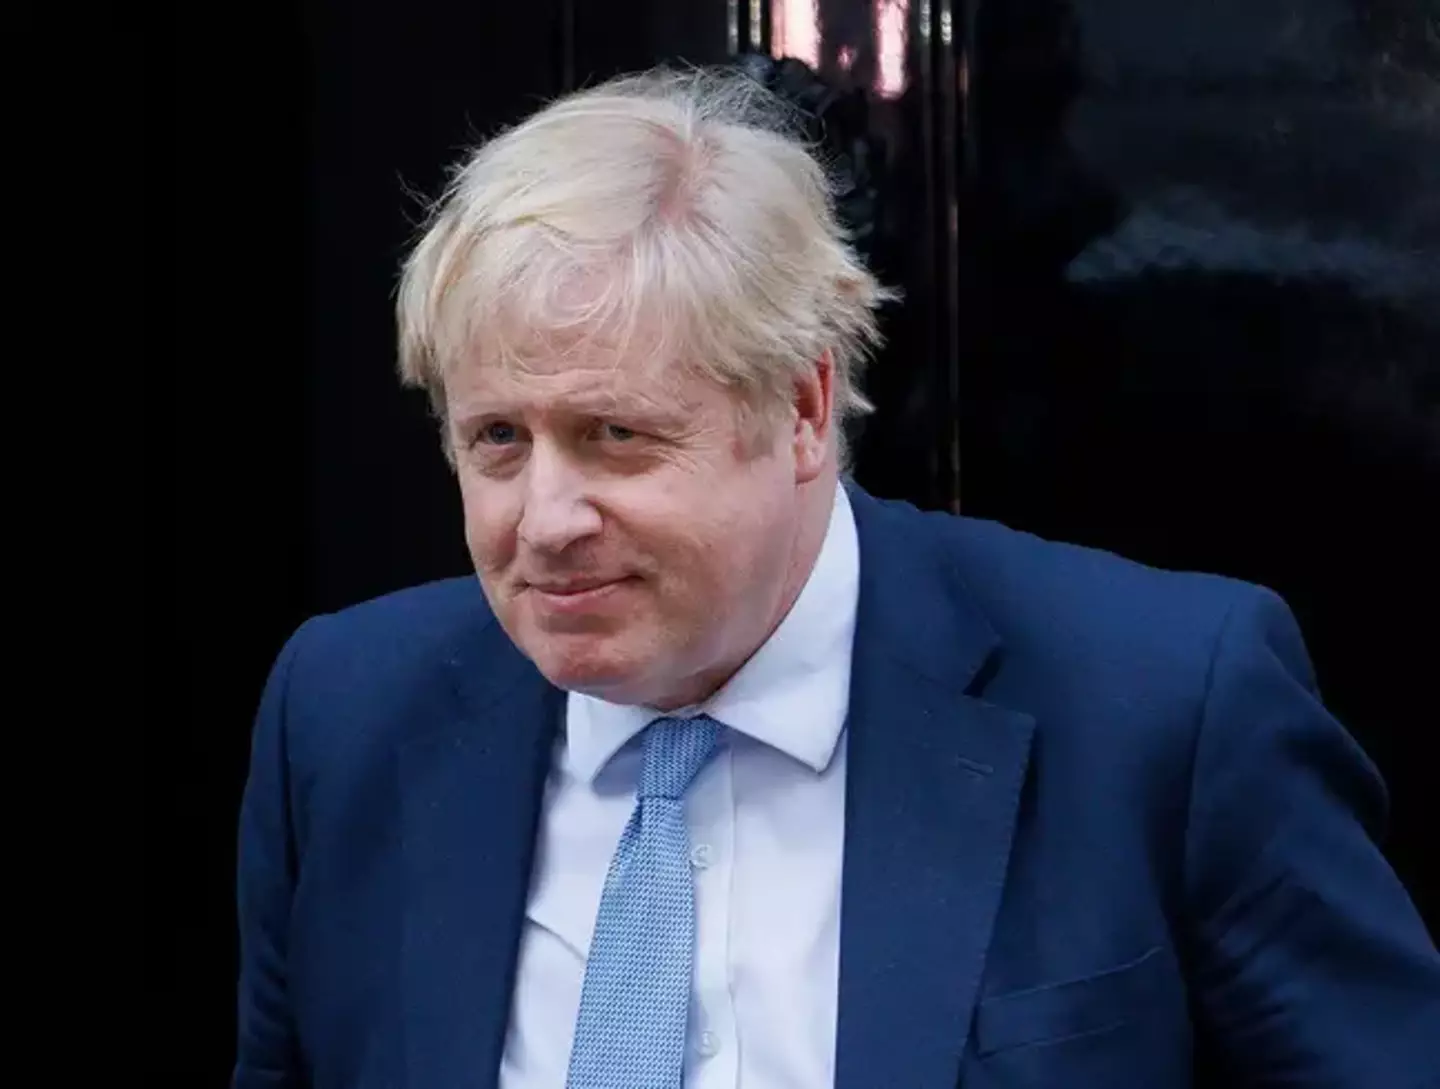 Boris Johnson's fate as Prime Minister will be decided in a vote of no confidence.